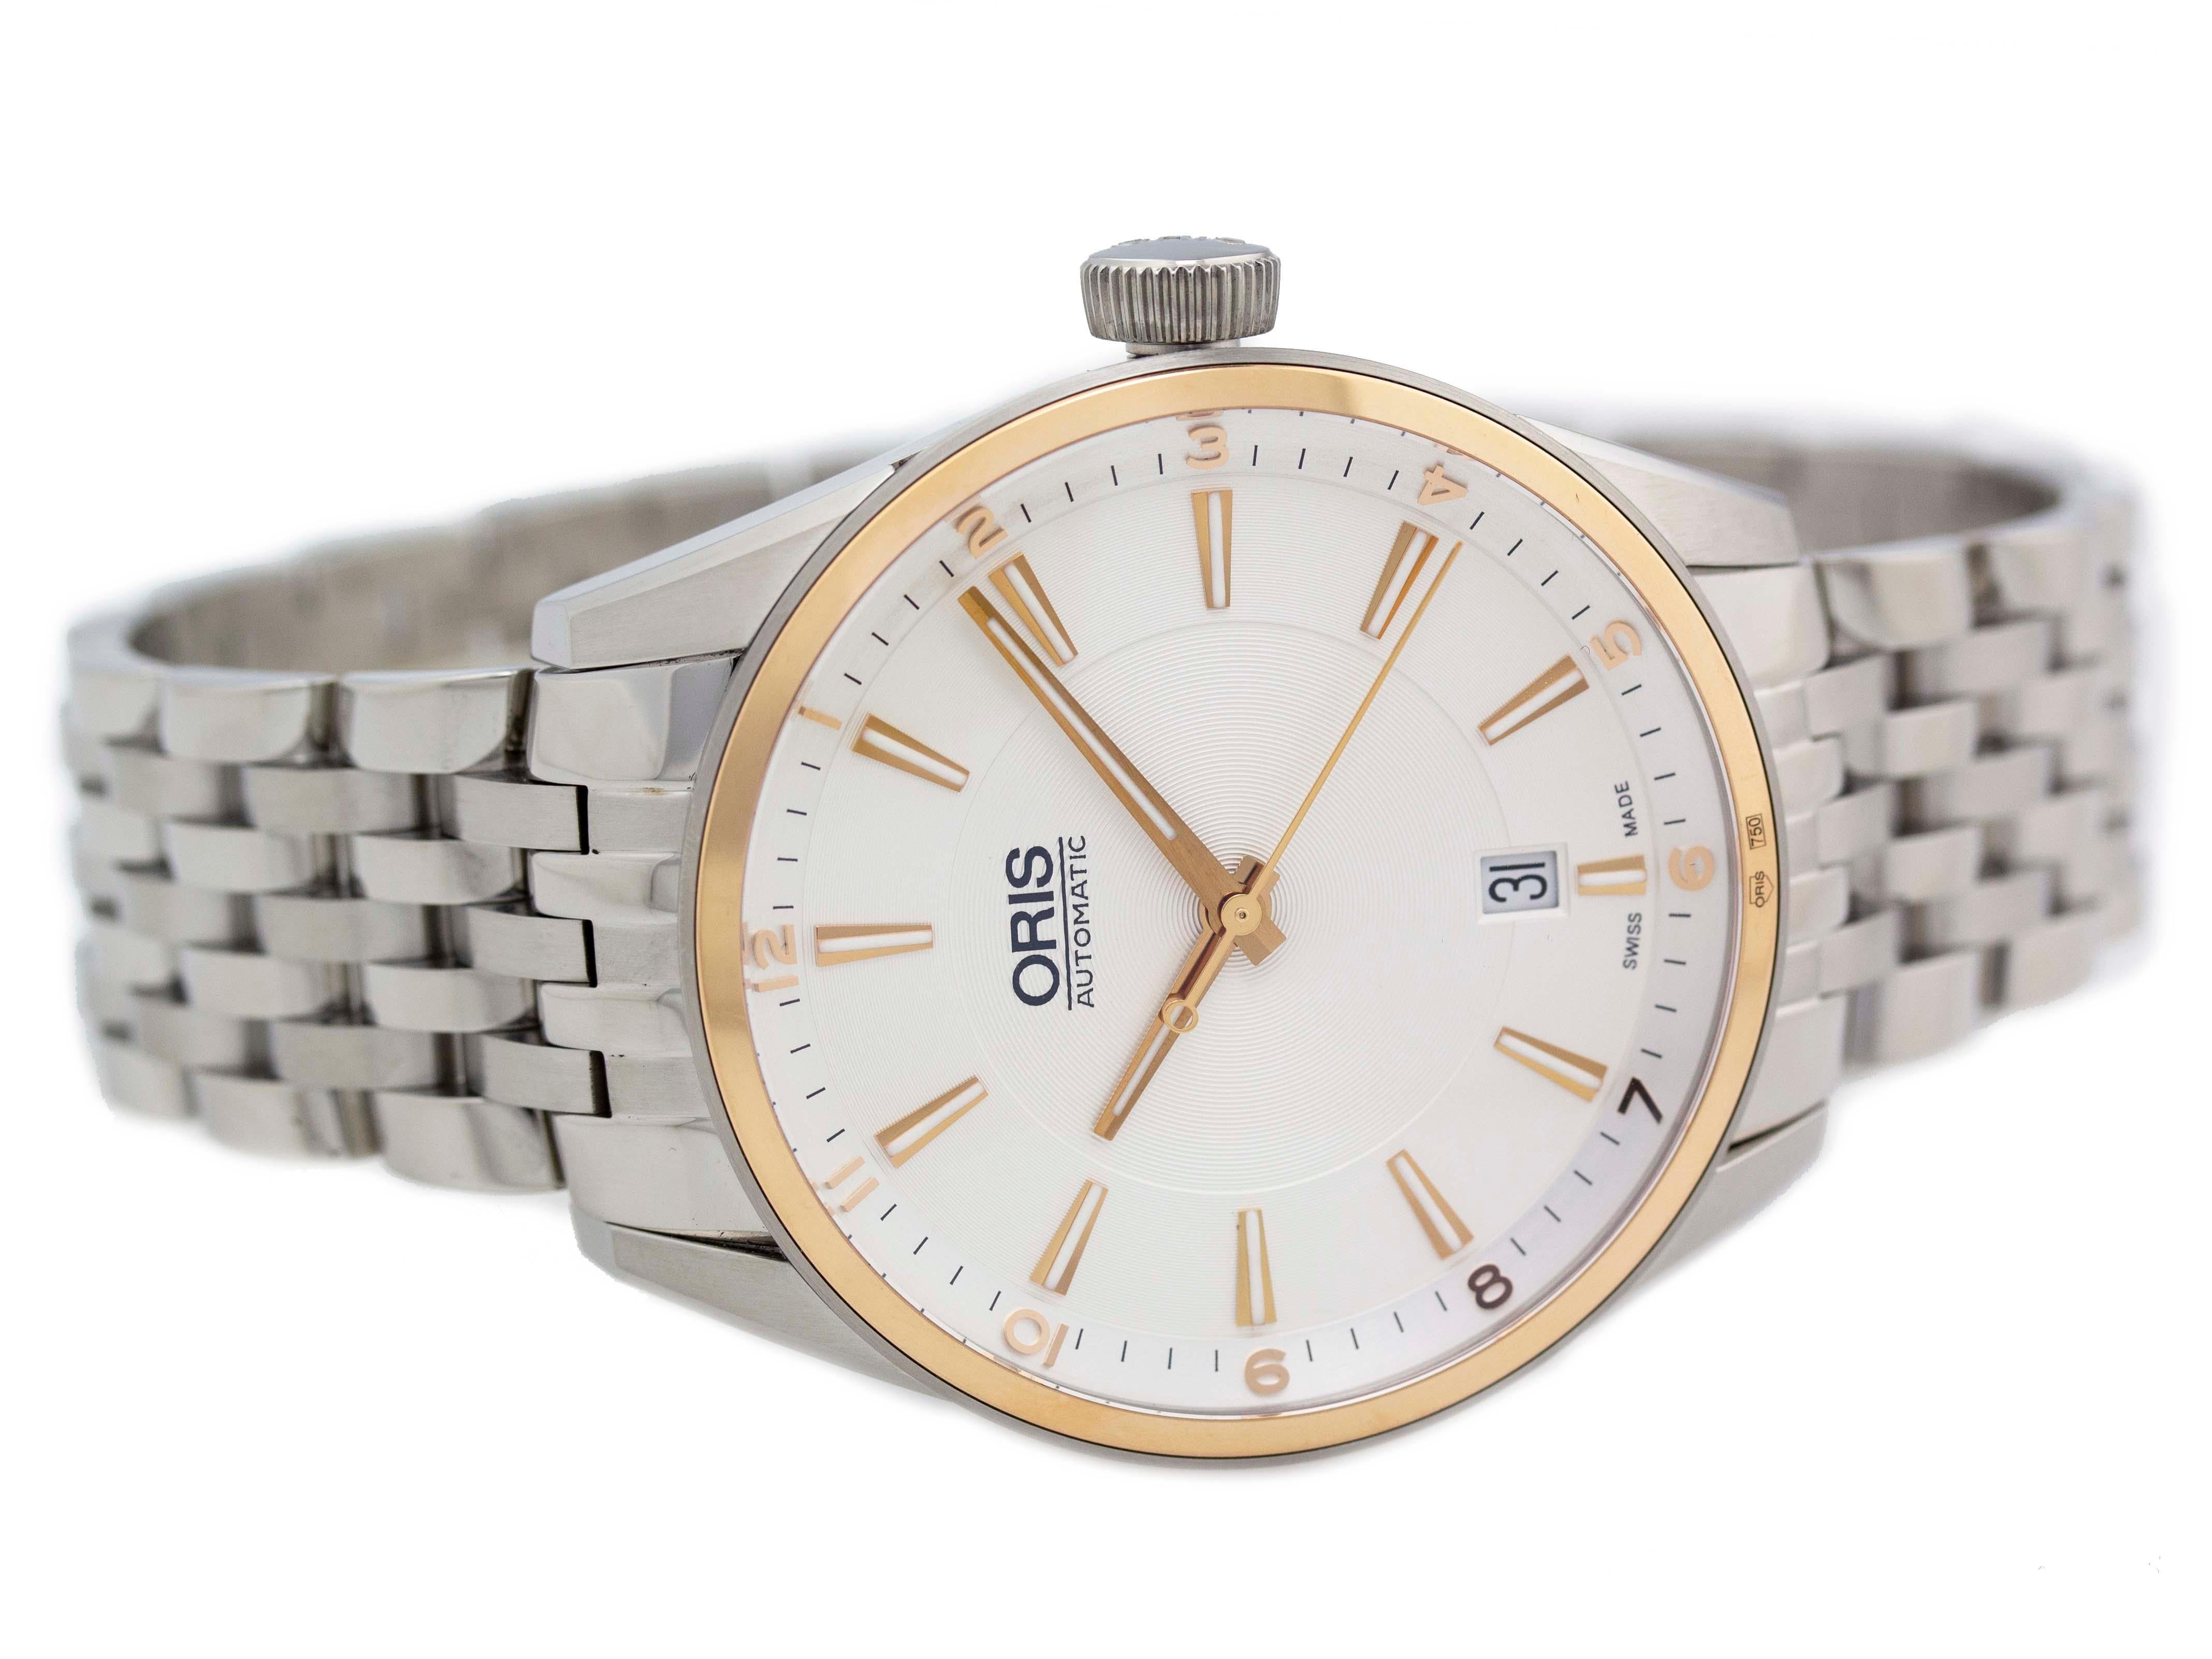 Oris Artix Date 01 733 7713 6331 07 8 19 80 In Excellent Condition For Sale In Willow Grove, PA